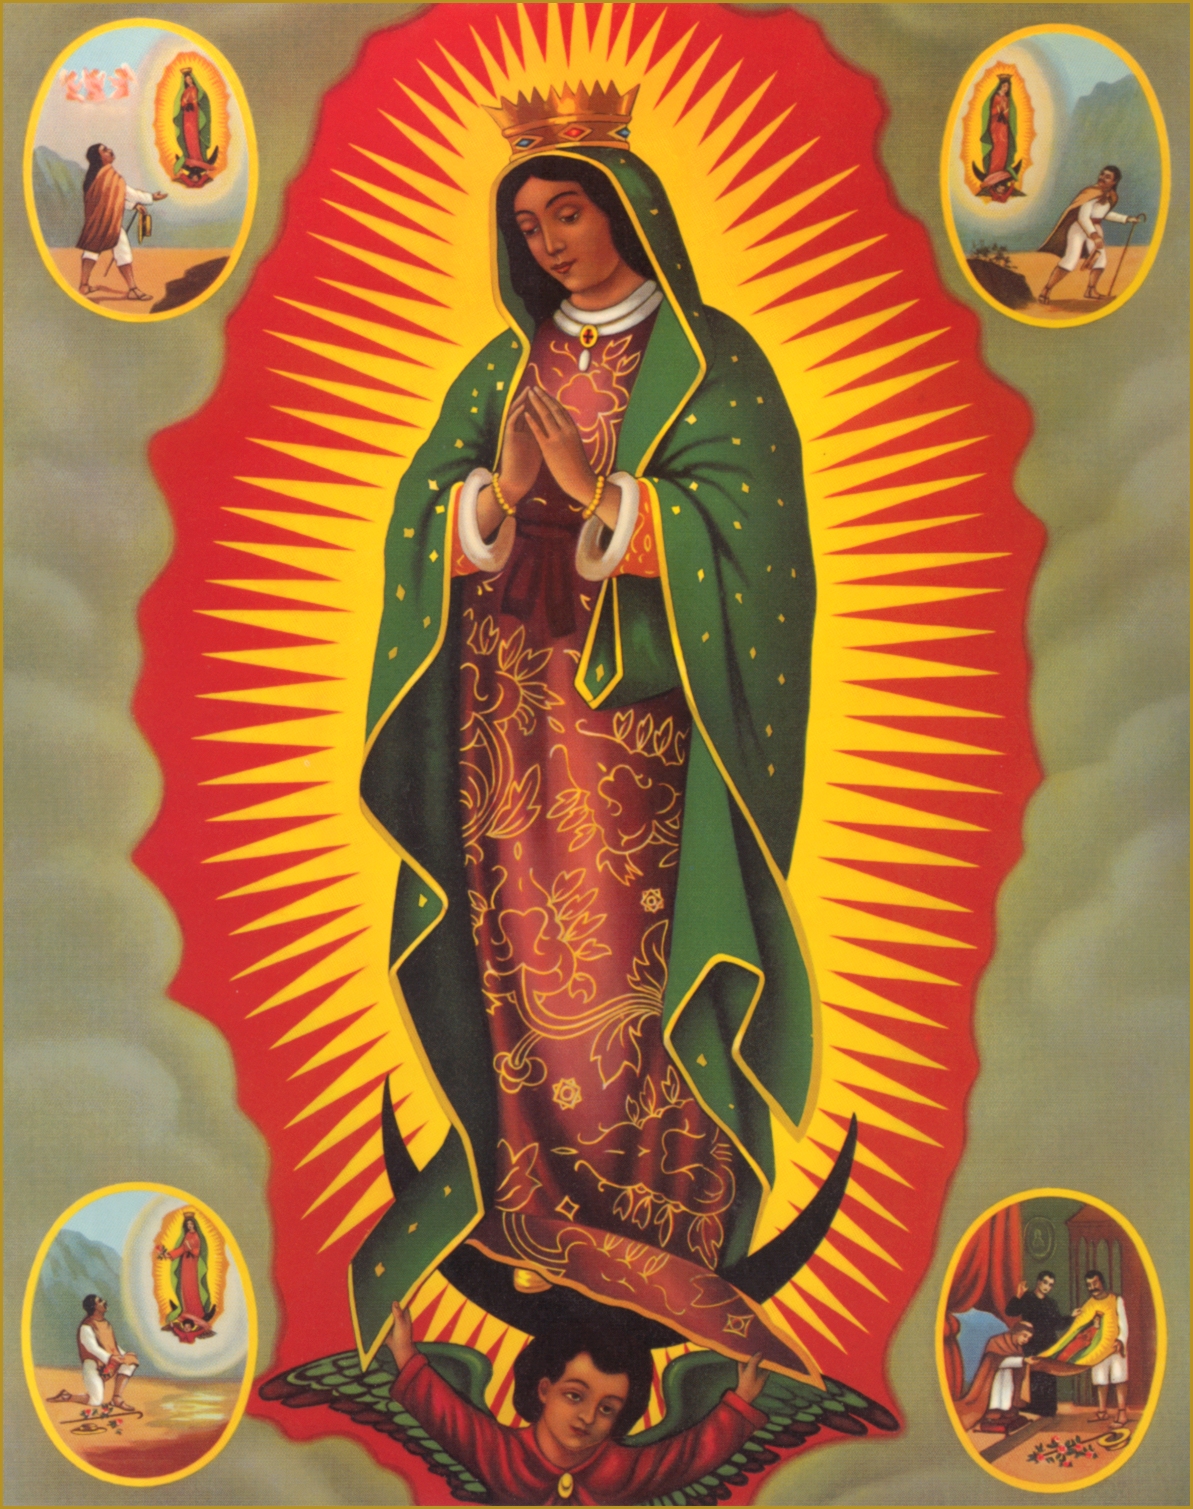 http://www.catholictradition.org/Mary/guadalupe3-2.jpg